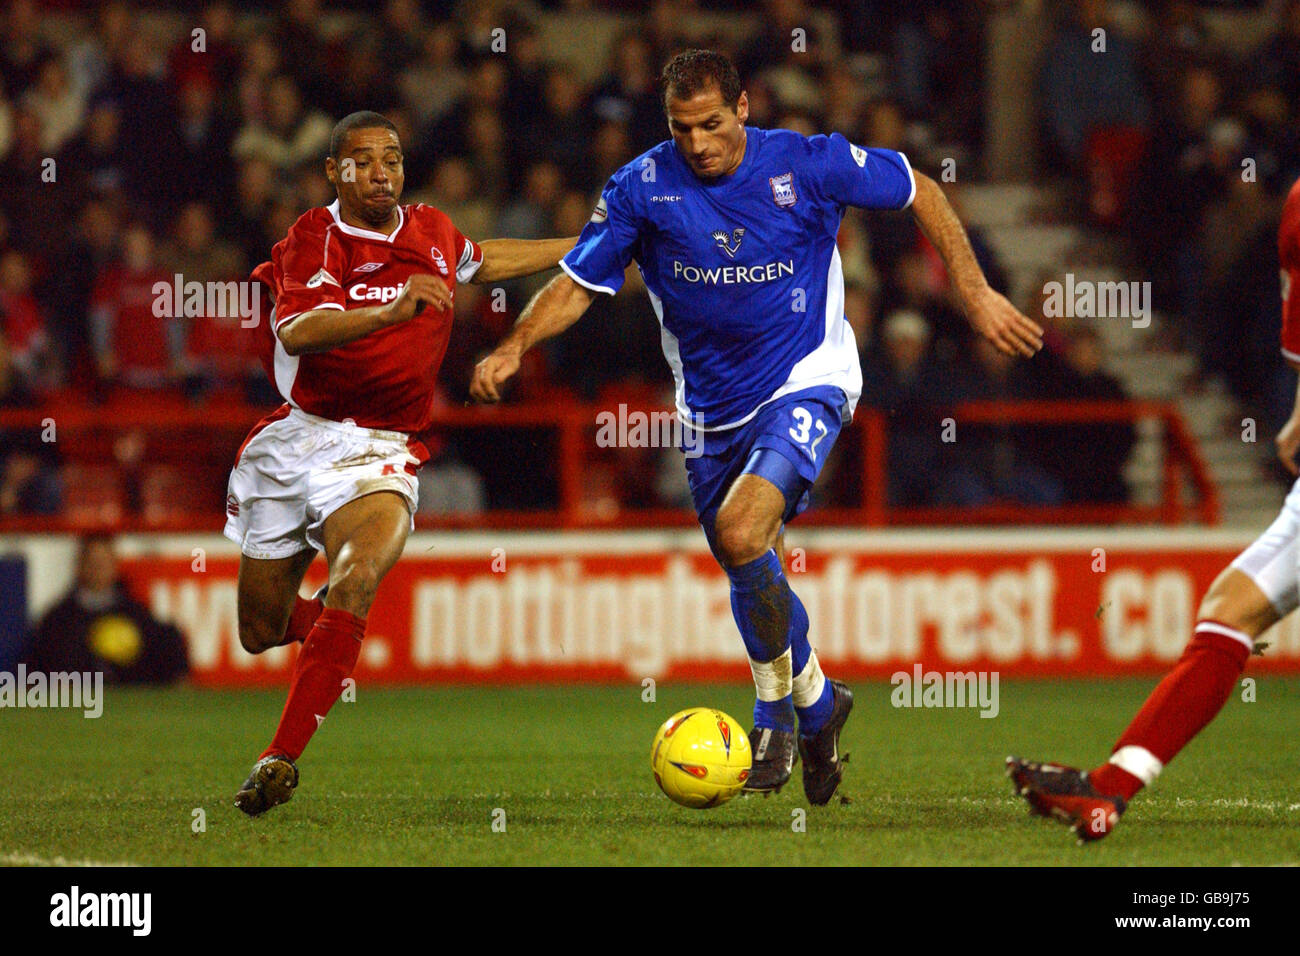 Nottingham Forest's Des Walker (l) and Ipswich Town's Shefki Kuqi (r)battle for the ball Stock Photo